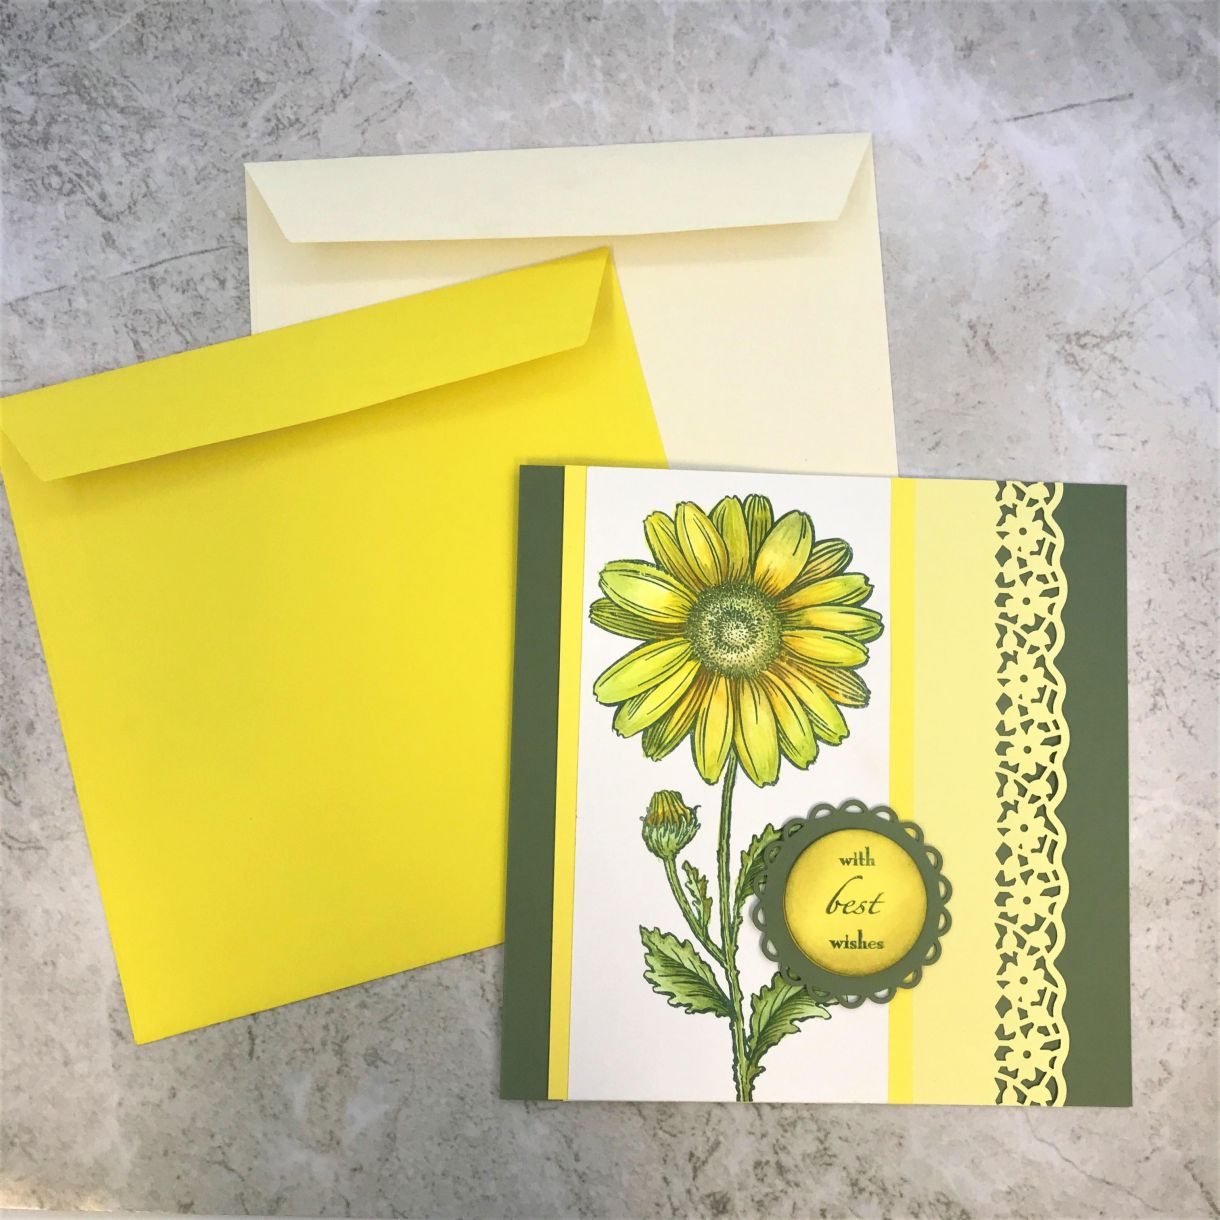 How To Make A Large Yellow Daisy Card 1